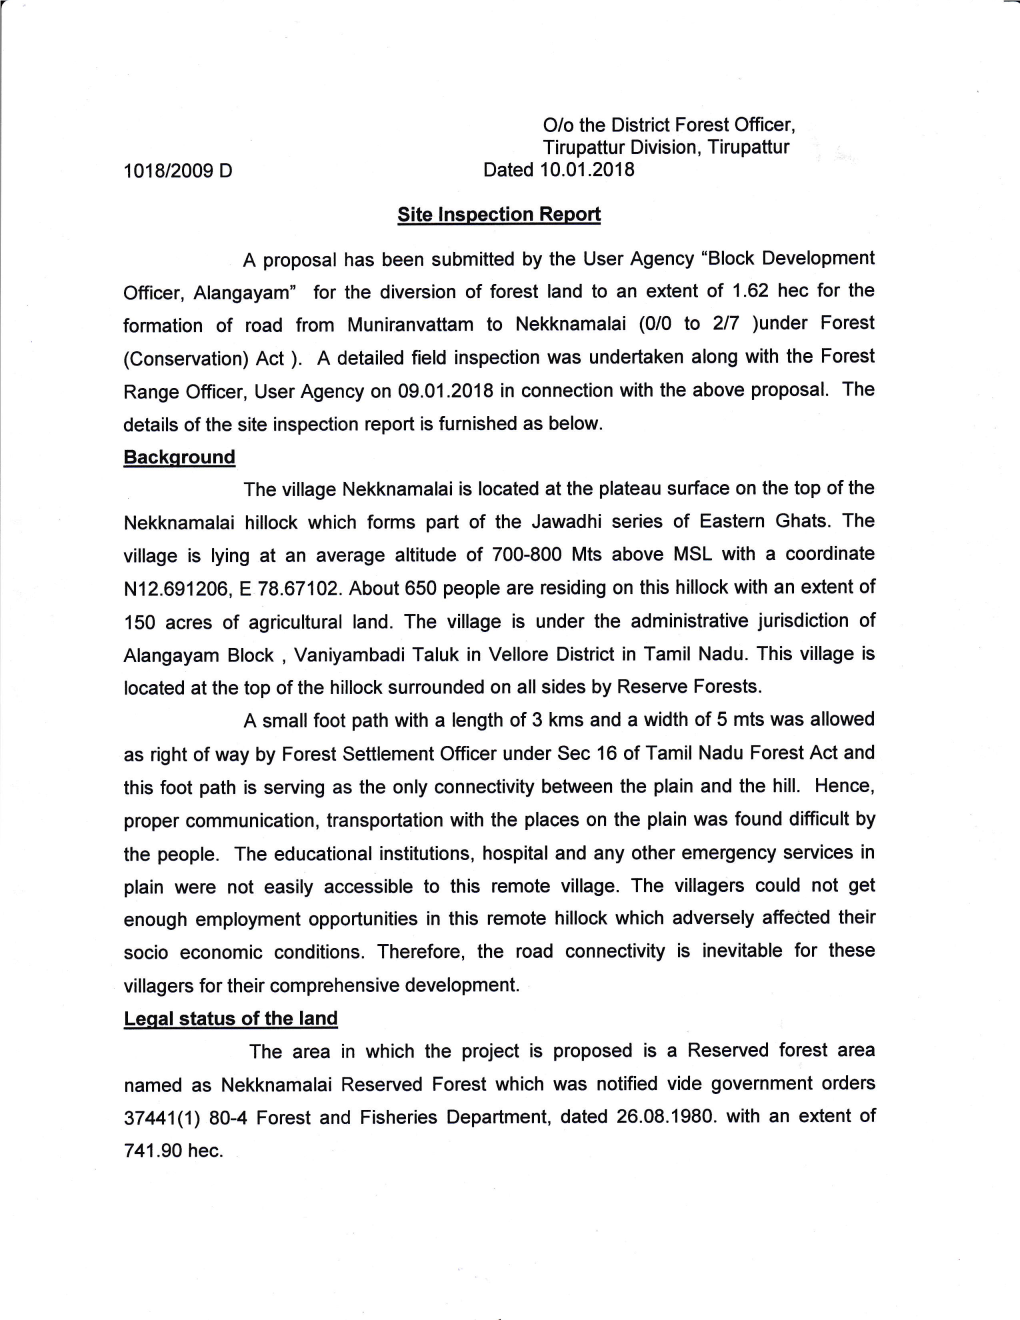 Site Lnspection Report Officer, Alangayam" for the Diversion of Forest Land to an Extent of 1.62 Hec for the Formation of R